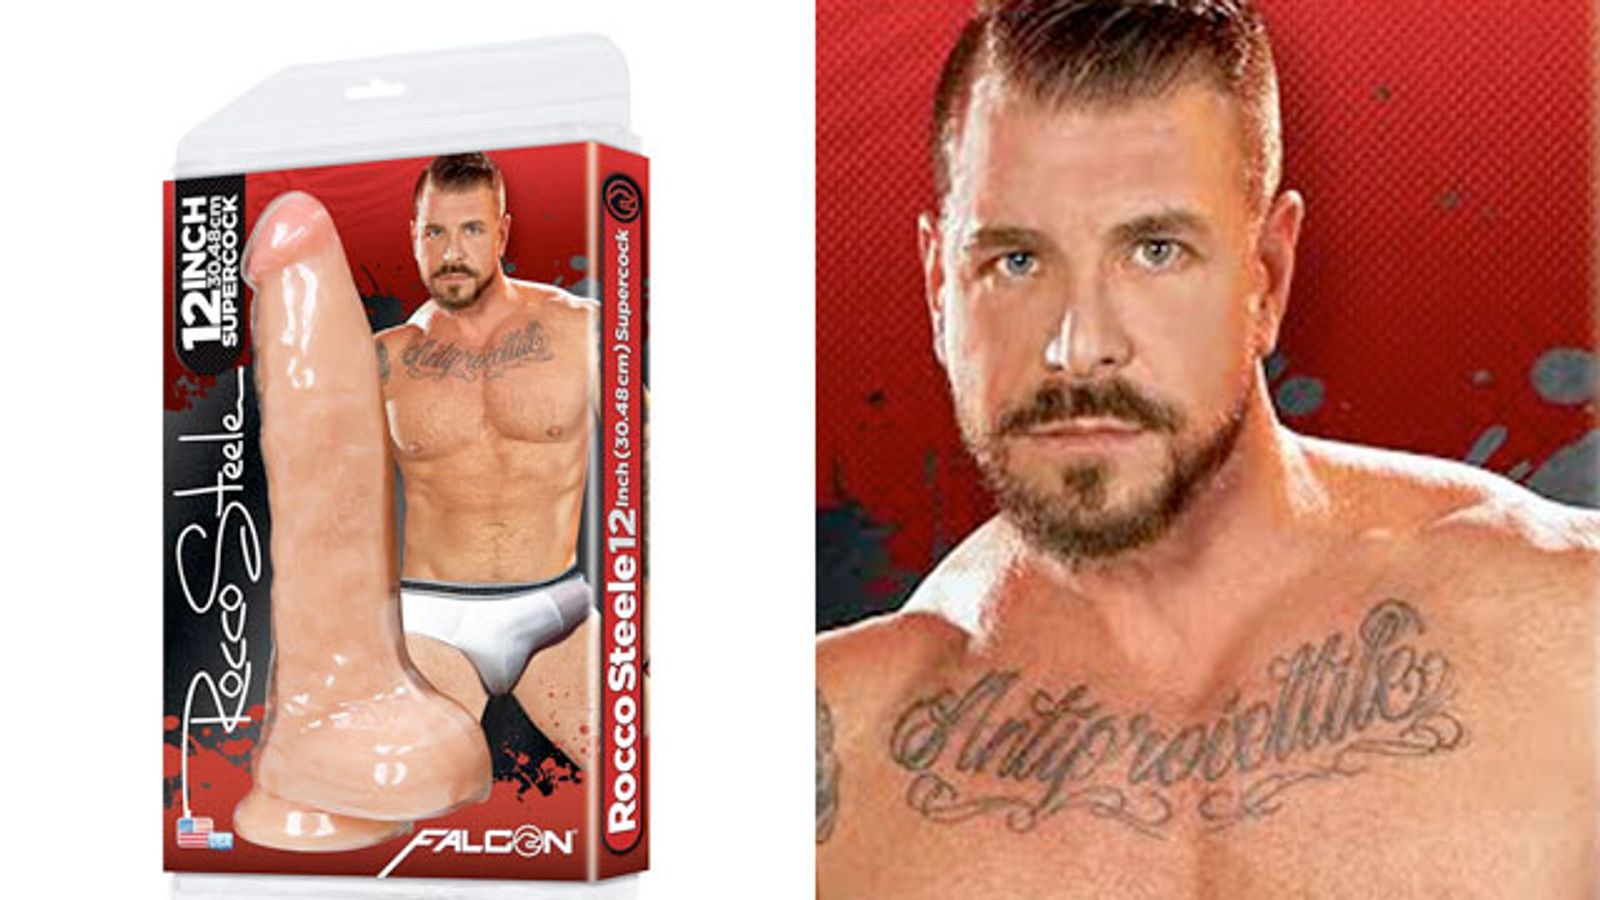 Rocco Steele Supercock Now Available from Falcon